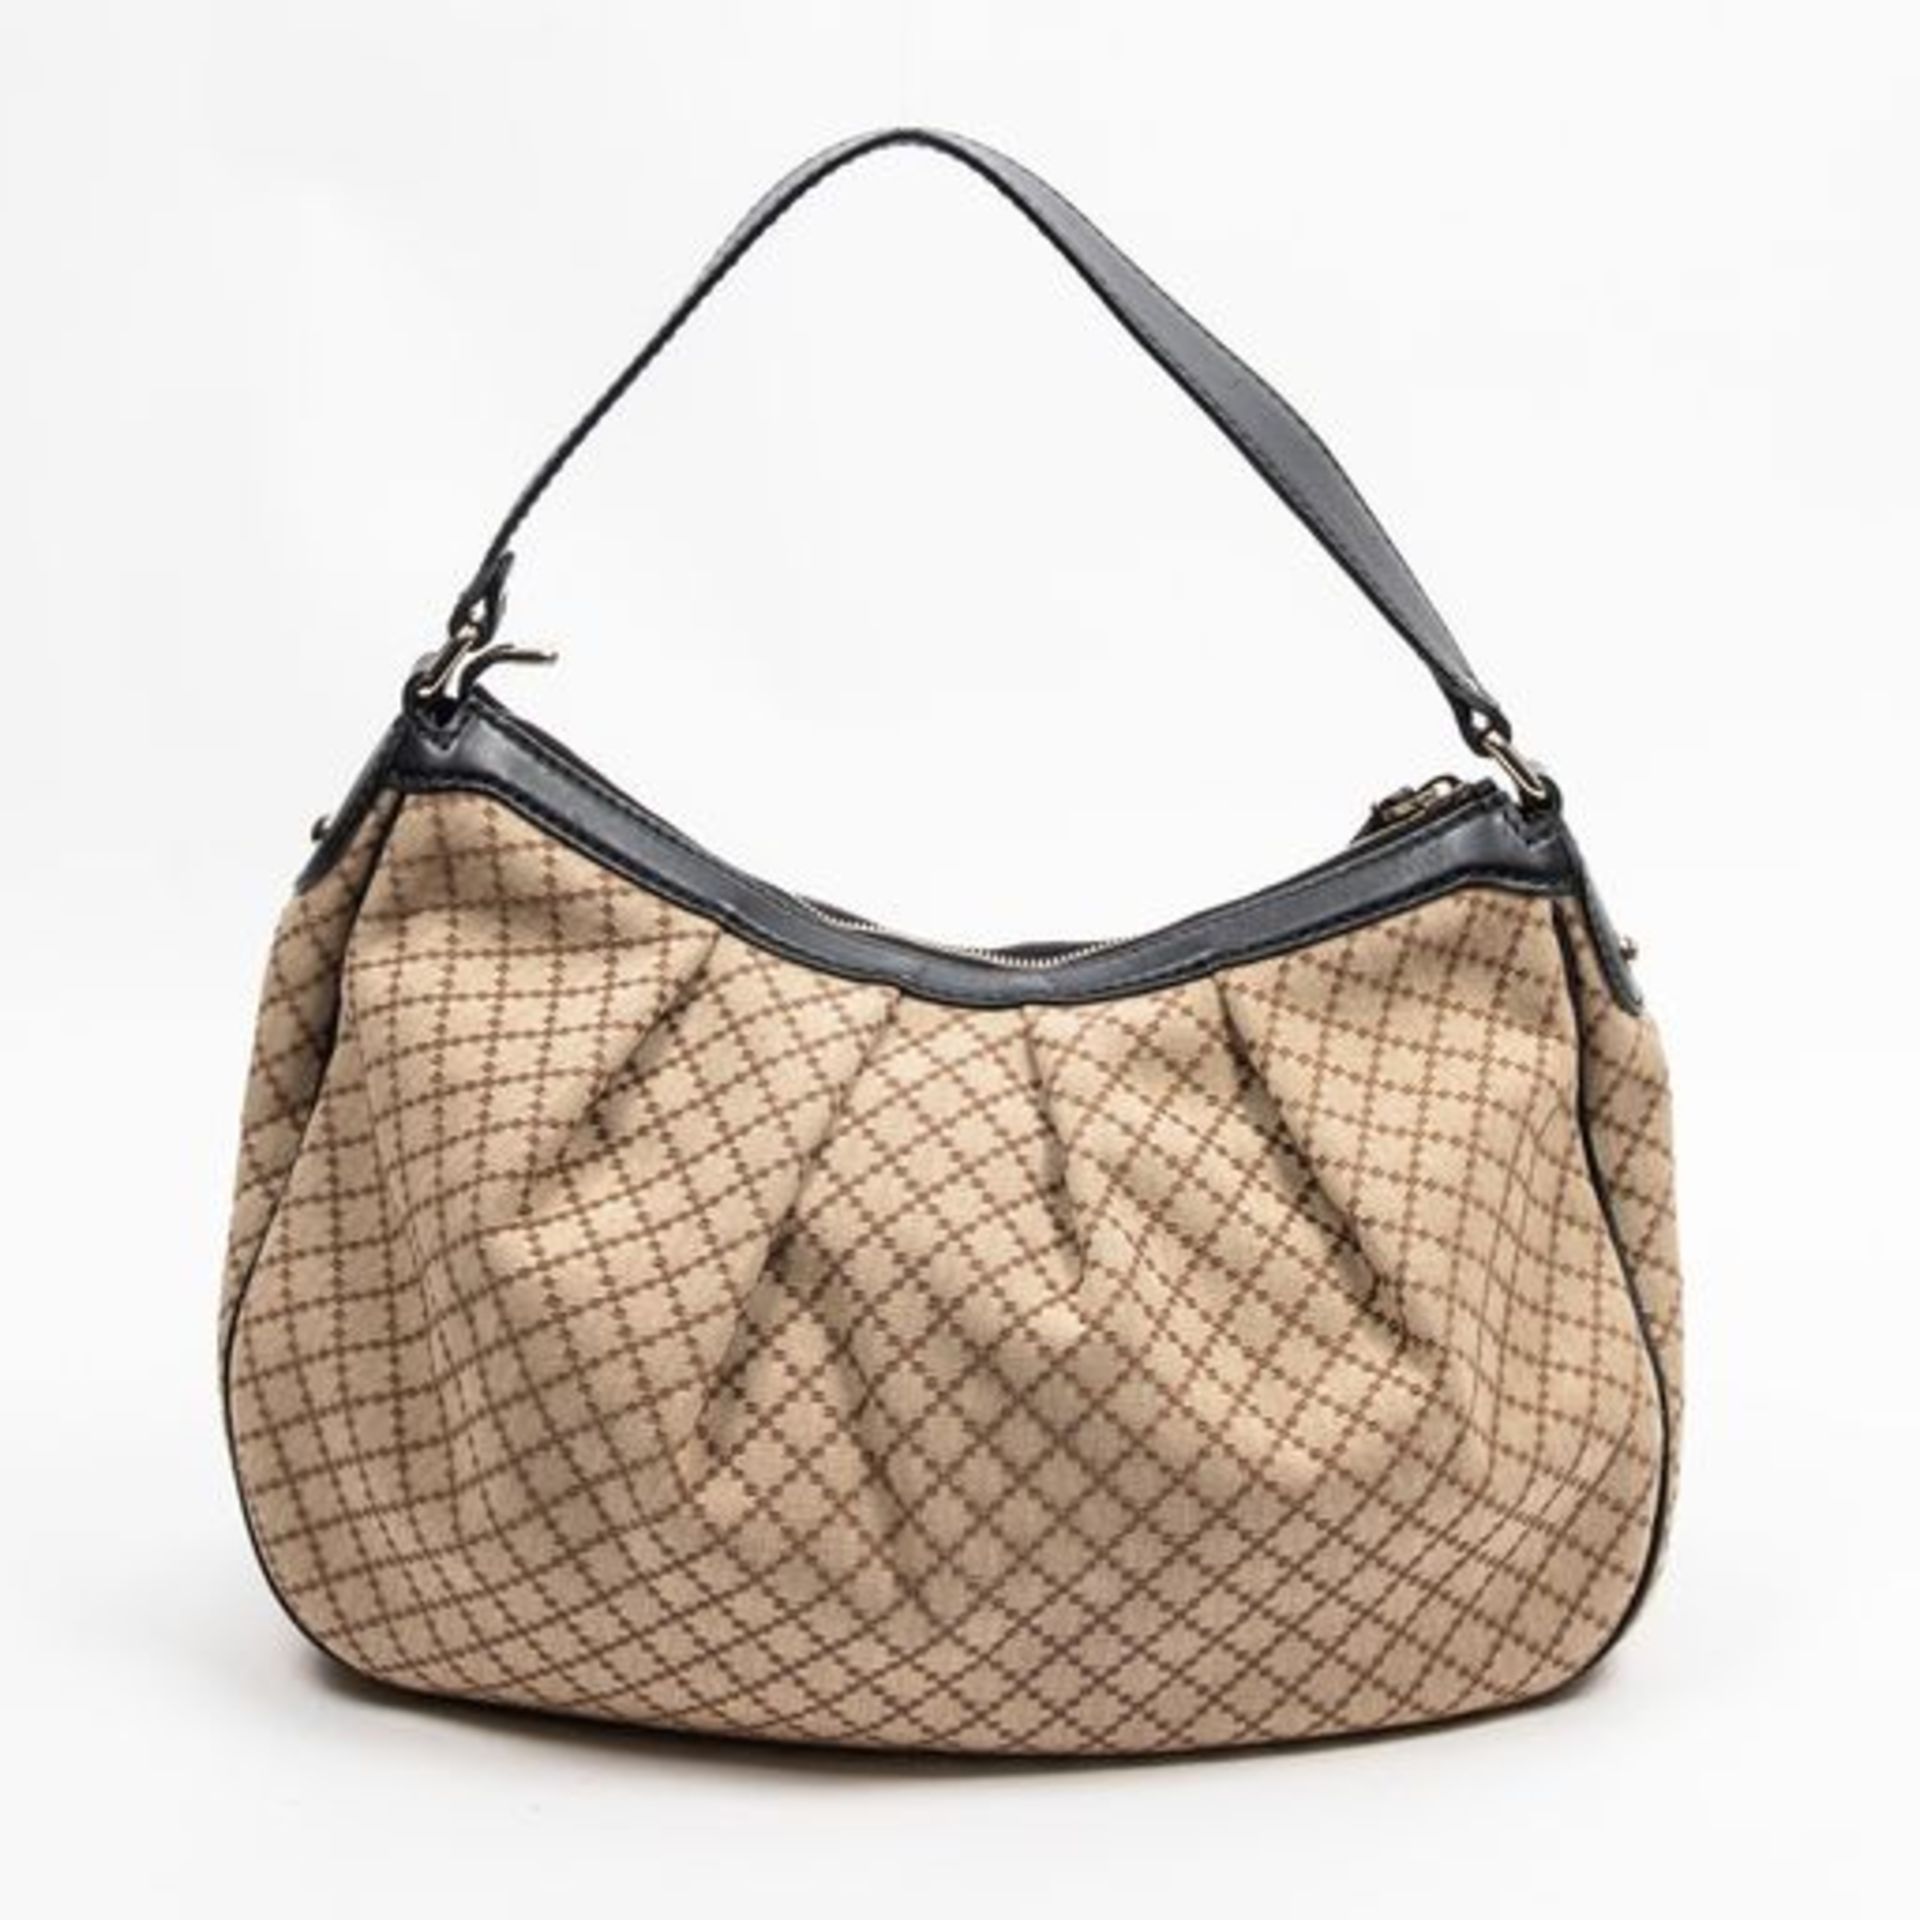 RRP £1185 Gucci Sukey Medium Hobo Shoulder Bag Beige/Black - AAS2128 - Grade AA - (Bags Are Not On - Image 3 of 5